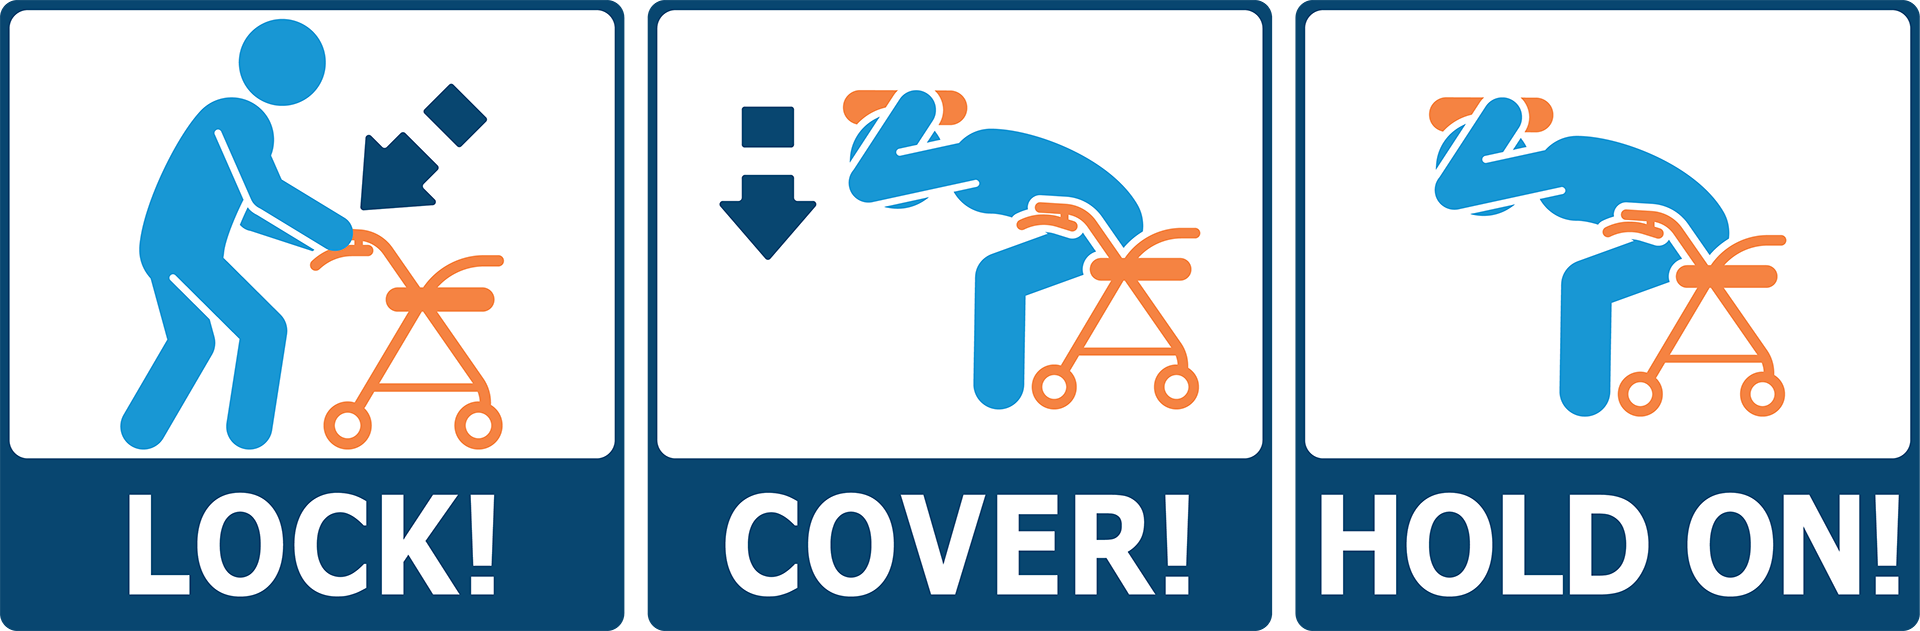 Lock, Cover, Hold On using a walker graphic